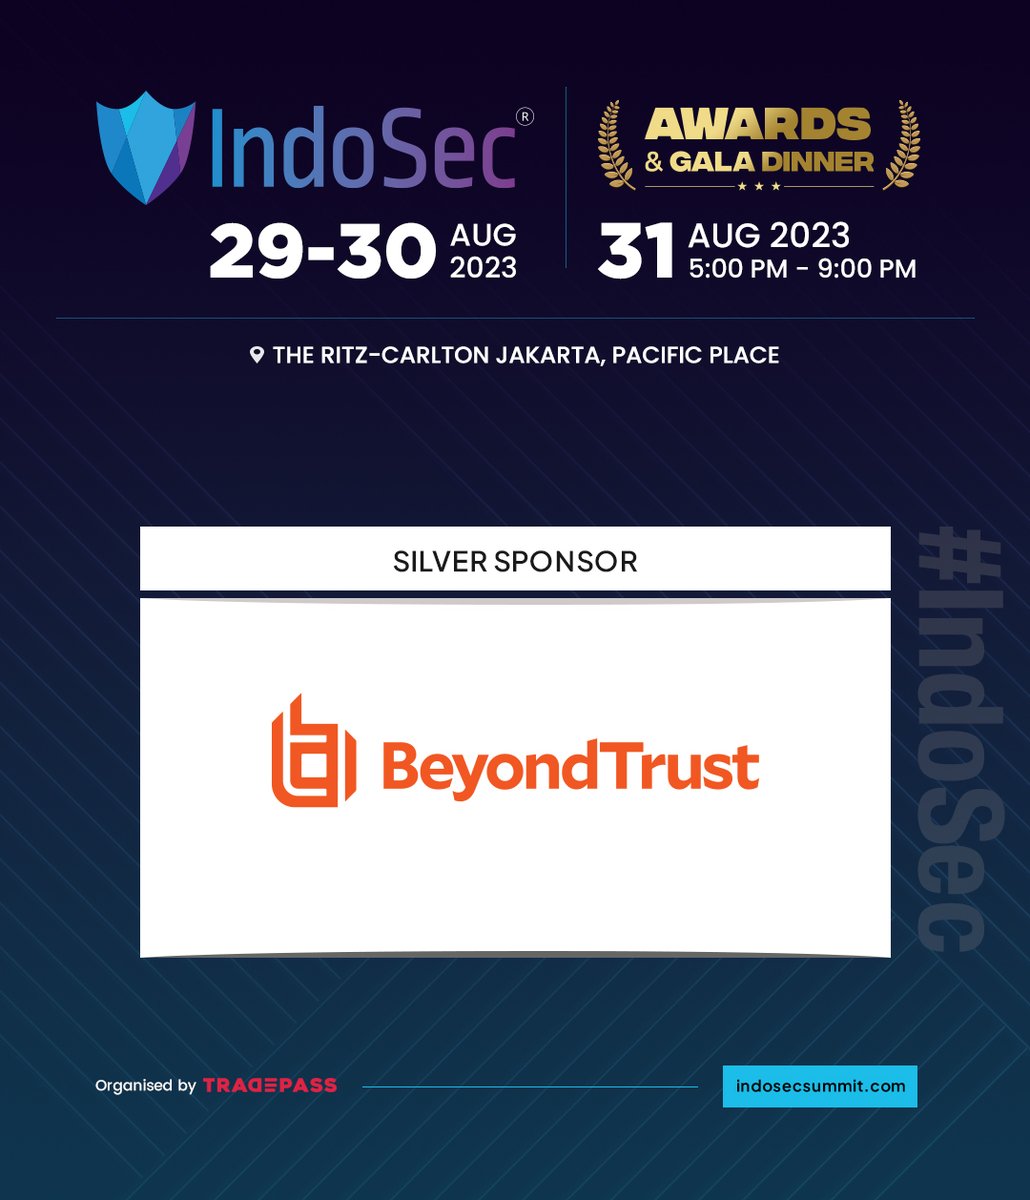 Join us in welcoming BeyondTrust to IndoSec 2023!
Register now to save you slot: hubs.la/Q01V0t7Z0

#IndoSec2023 #cybersecurity #cyberdefense #networksecurity #zerotrustsecurity #cloudsecurity #InformationSecurity #Forensic #digitalforensics #cyberwarfare #AI #ML #tradepass